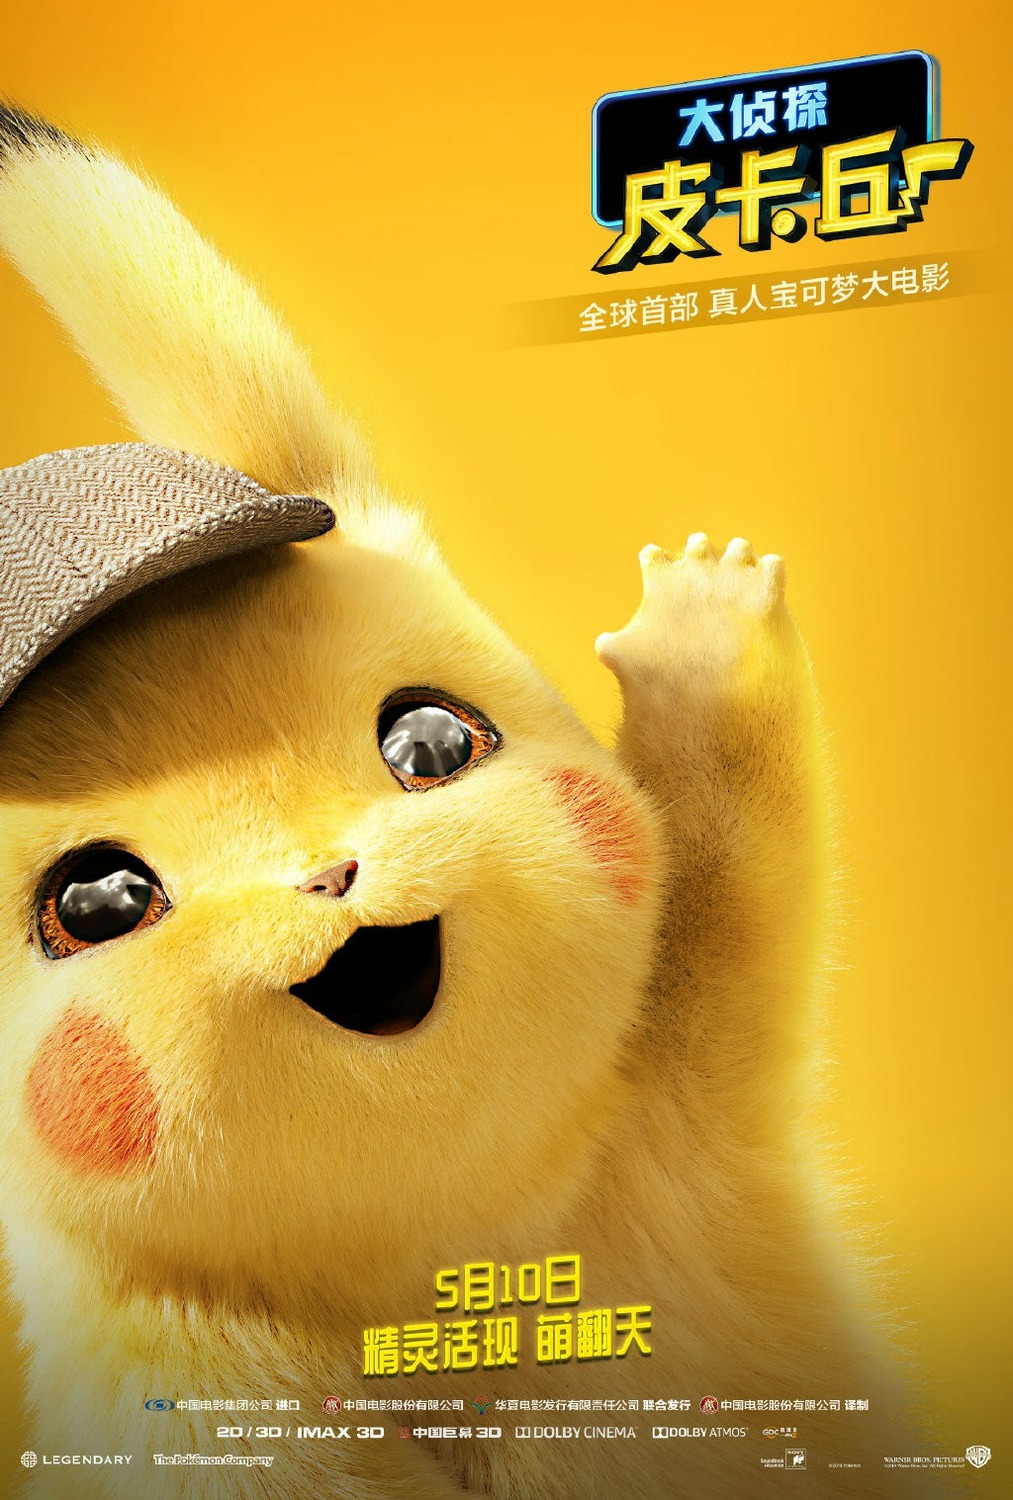 Extra Large Movie Poster Image for Pokémon Detective Pikachu (#14 of 26)